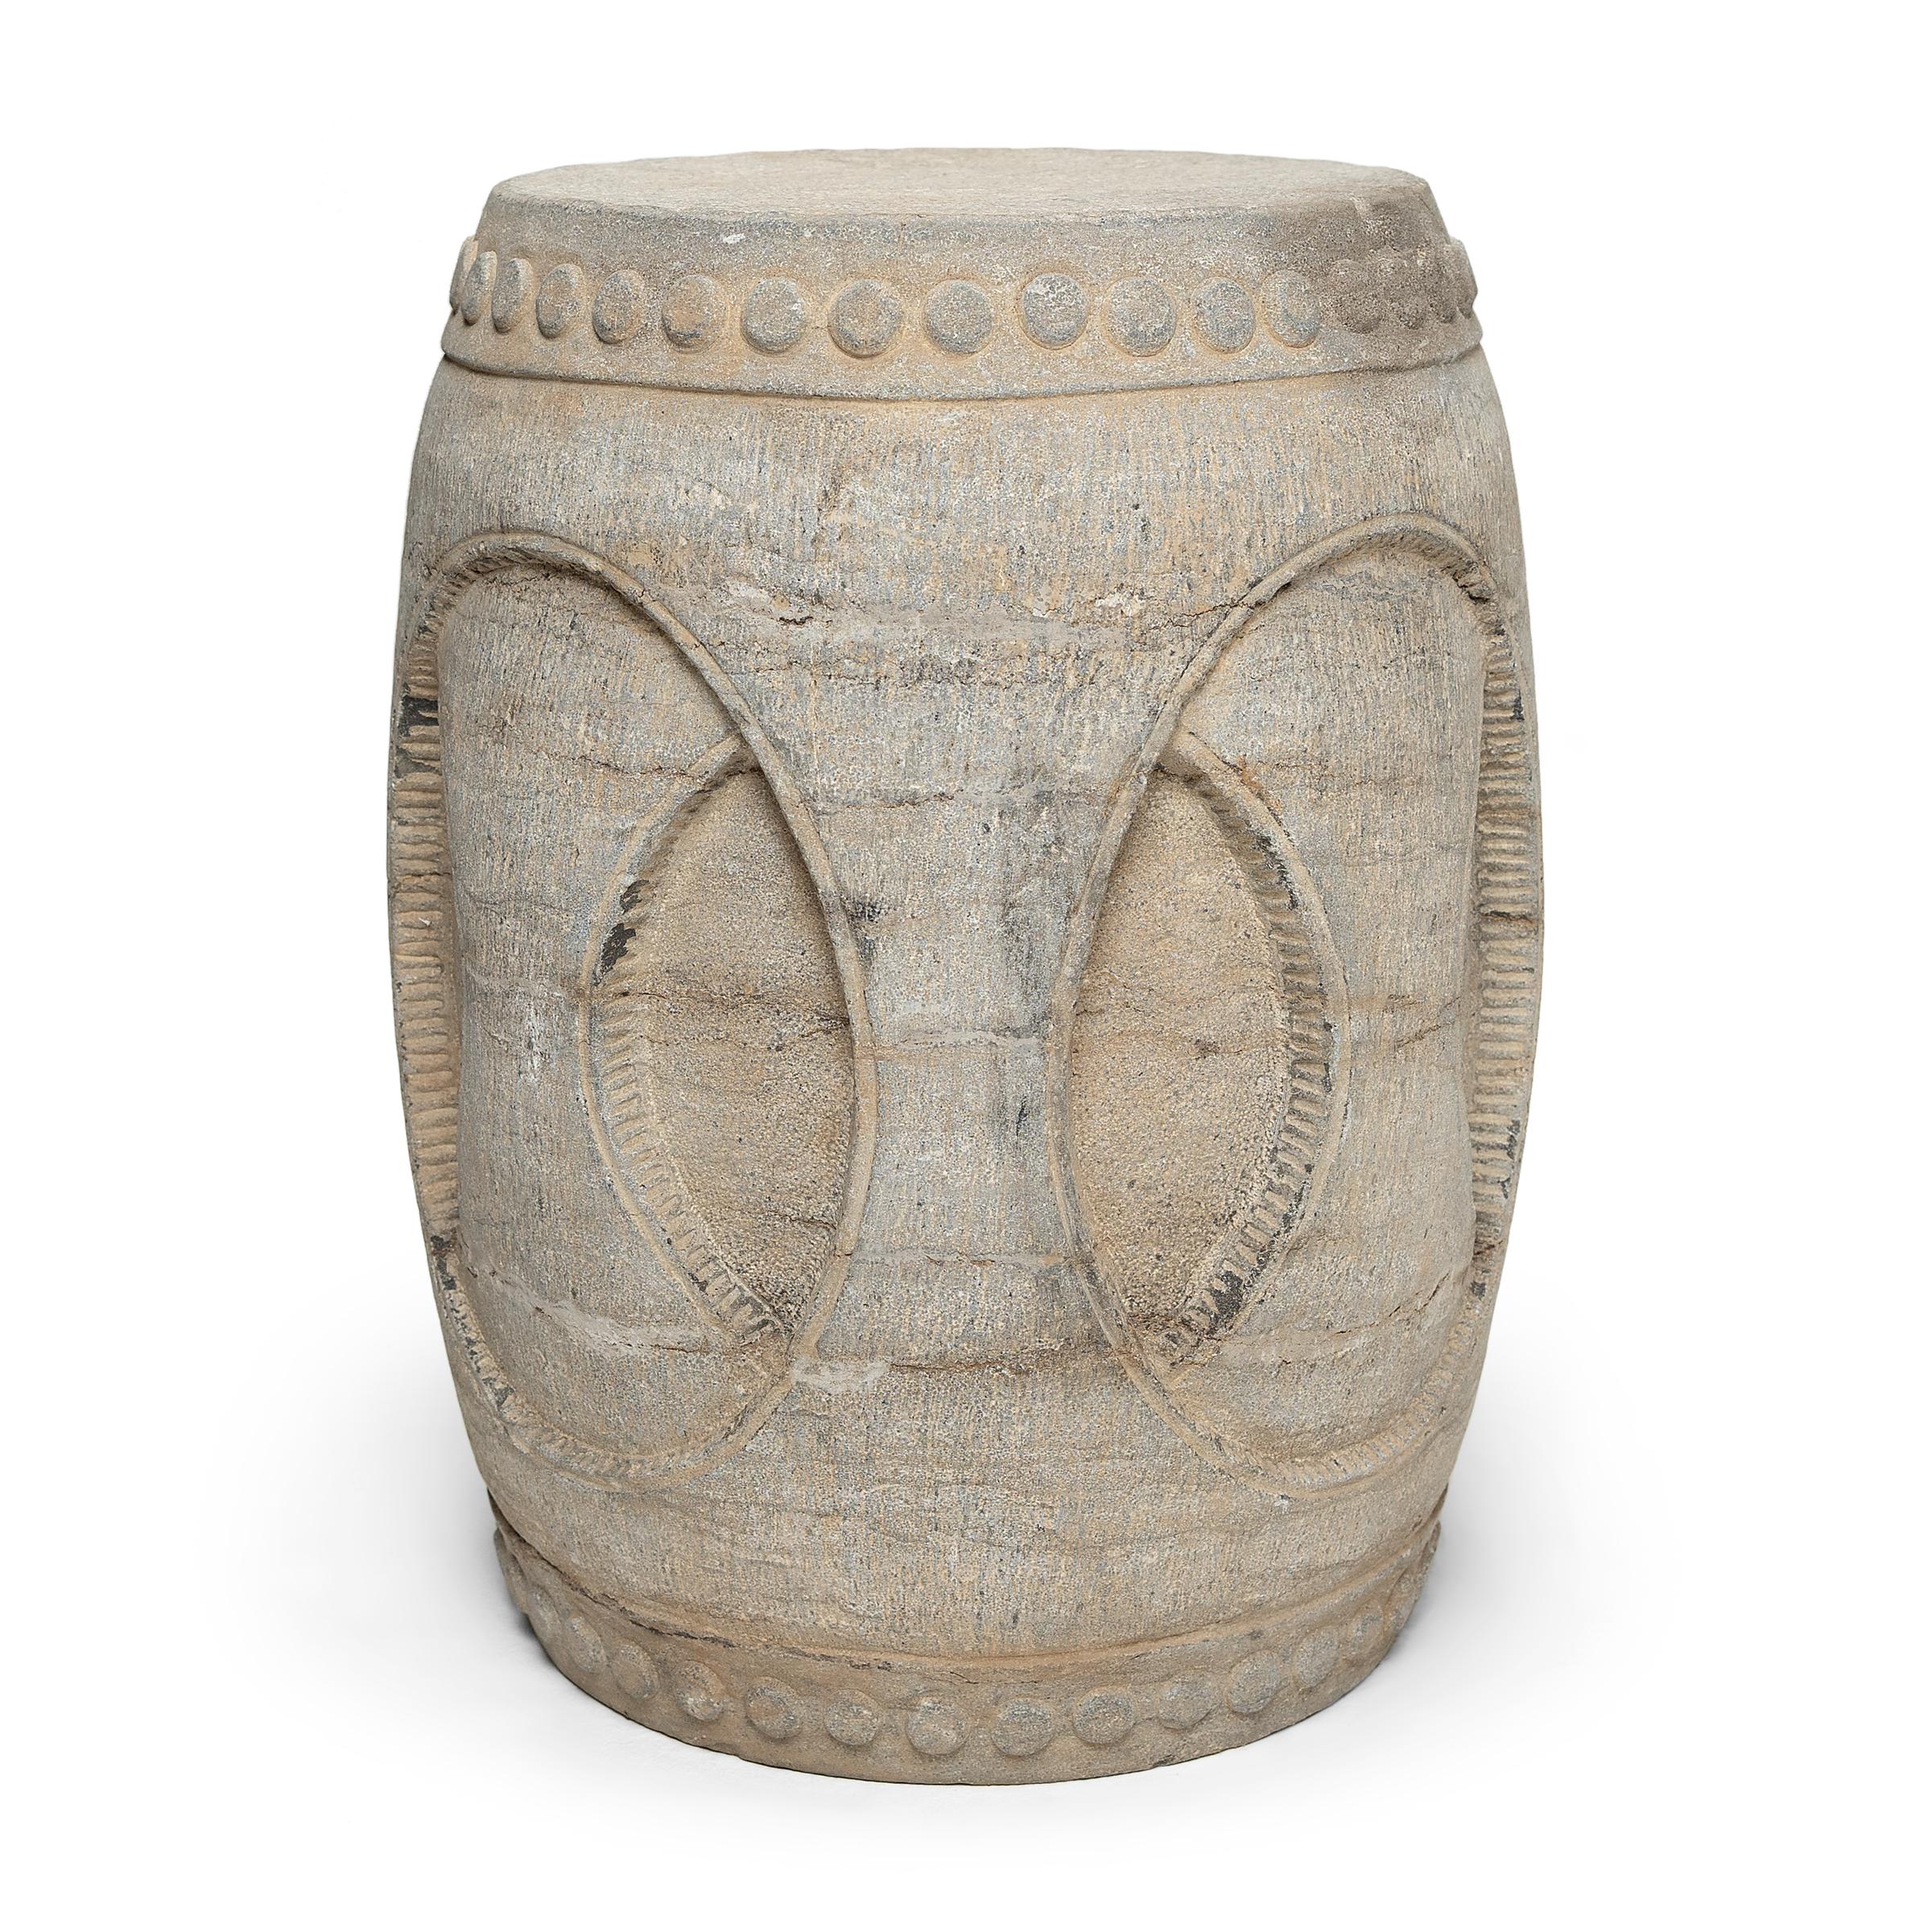 Drum-form stools such as this were traditionally used in gardens and outdoor pavilions where upper class scholars read, wrote, gathered for discussion and, in general, developed their inner sensibilities. This contemporary example was carved from a